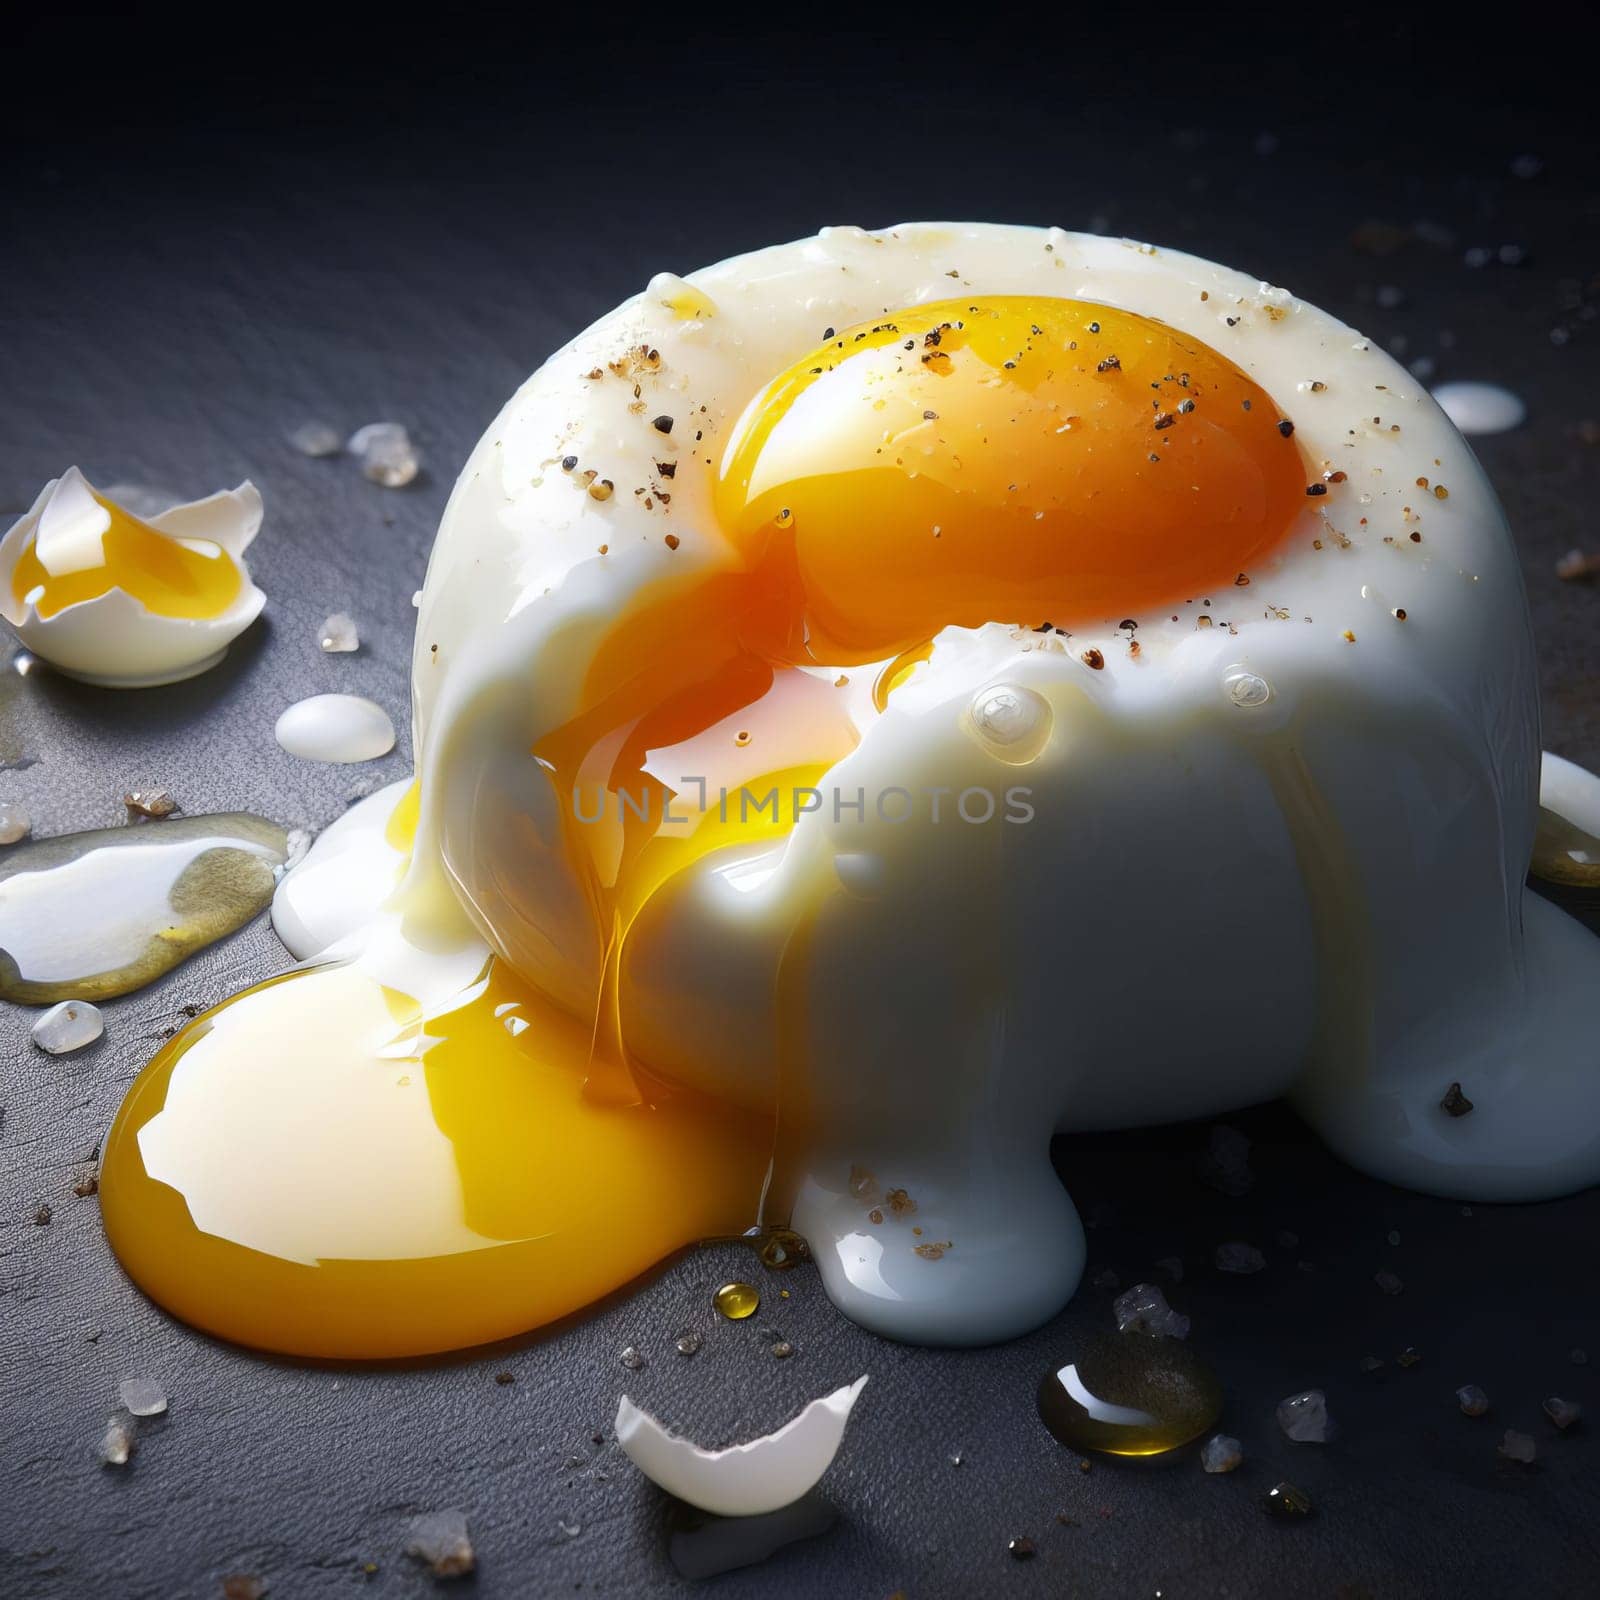 Close-up image of a cracked prepare egg with yolk spilling out, seasoned with pepper, on a dark surface